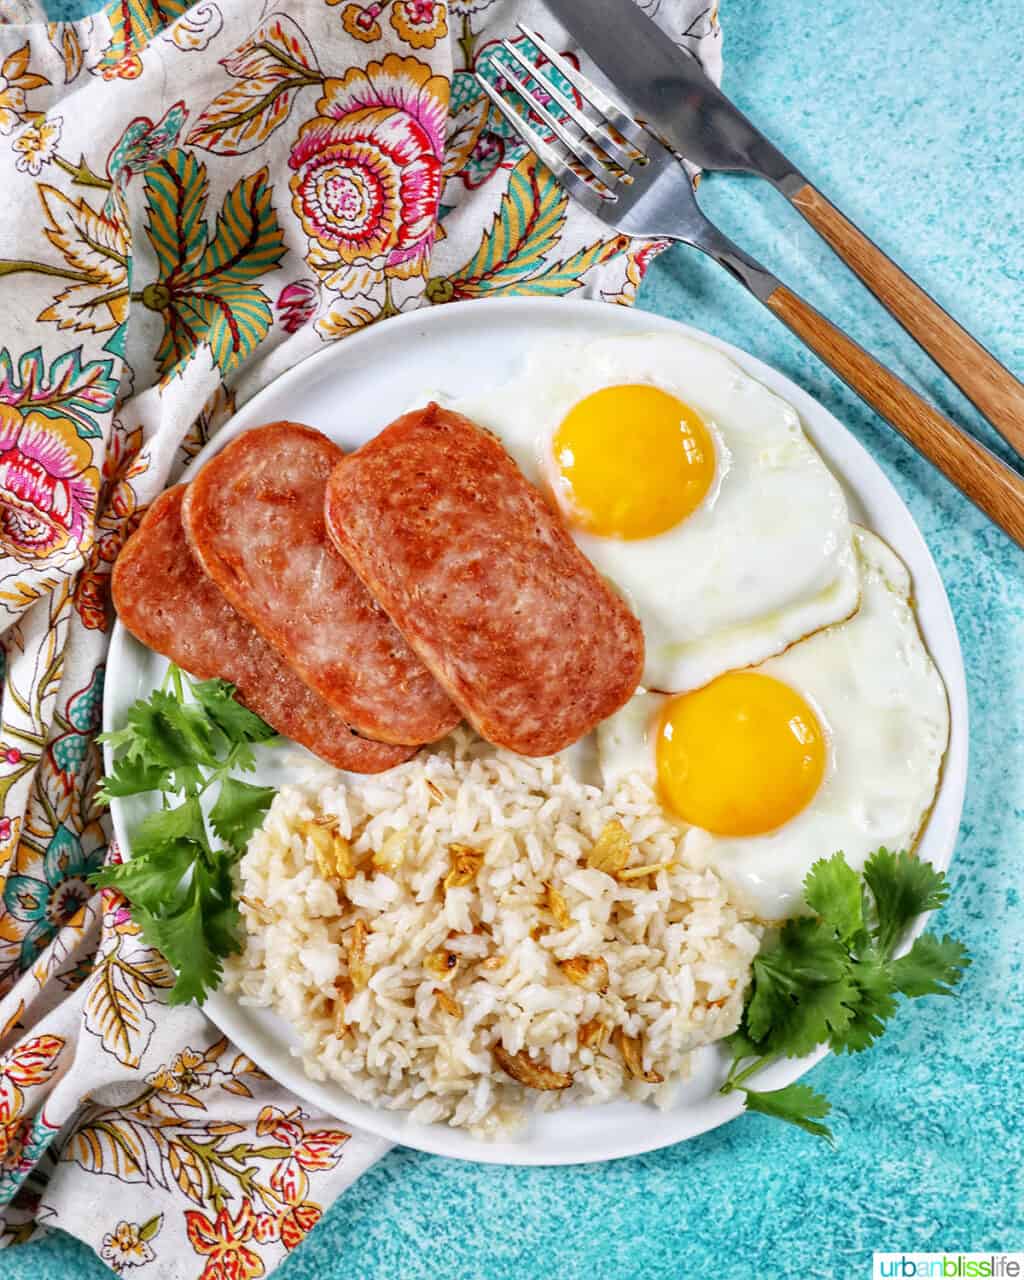 Plate of Spamsilog: slices of Spam, two eggs over easy, and Filipino Sinangag garlic rice with greens and fork and knife.